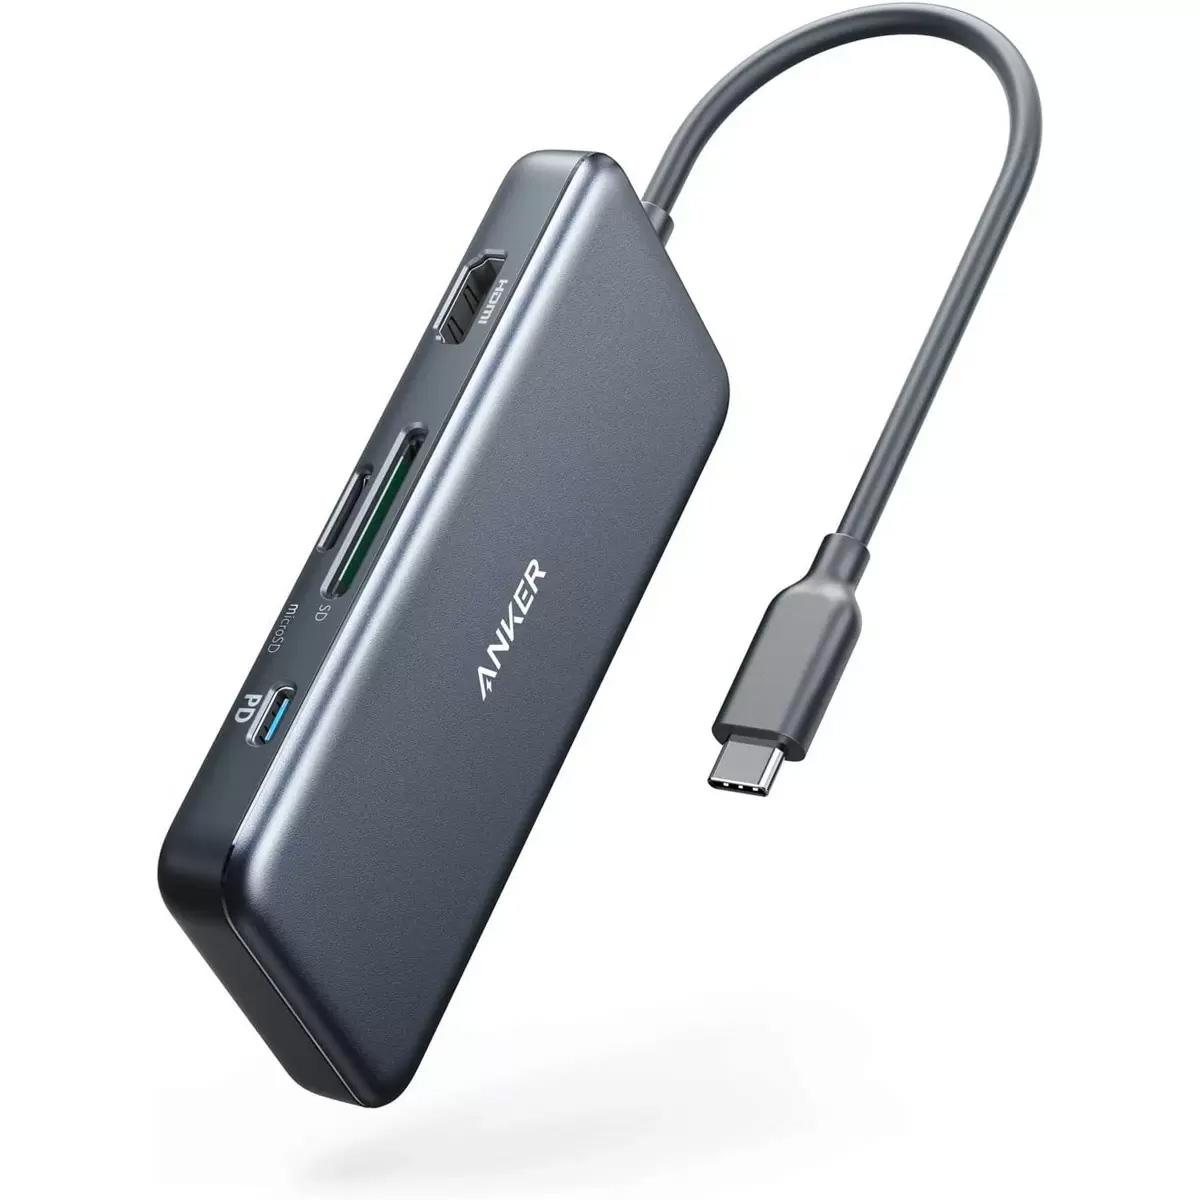 Anker 7-in-1 USB C to HDMI Hub with 100W PD for $23.79